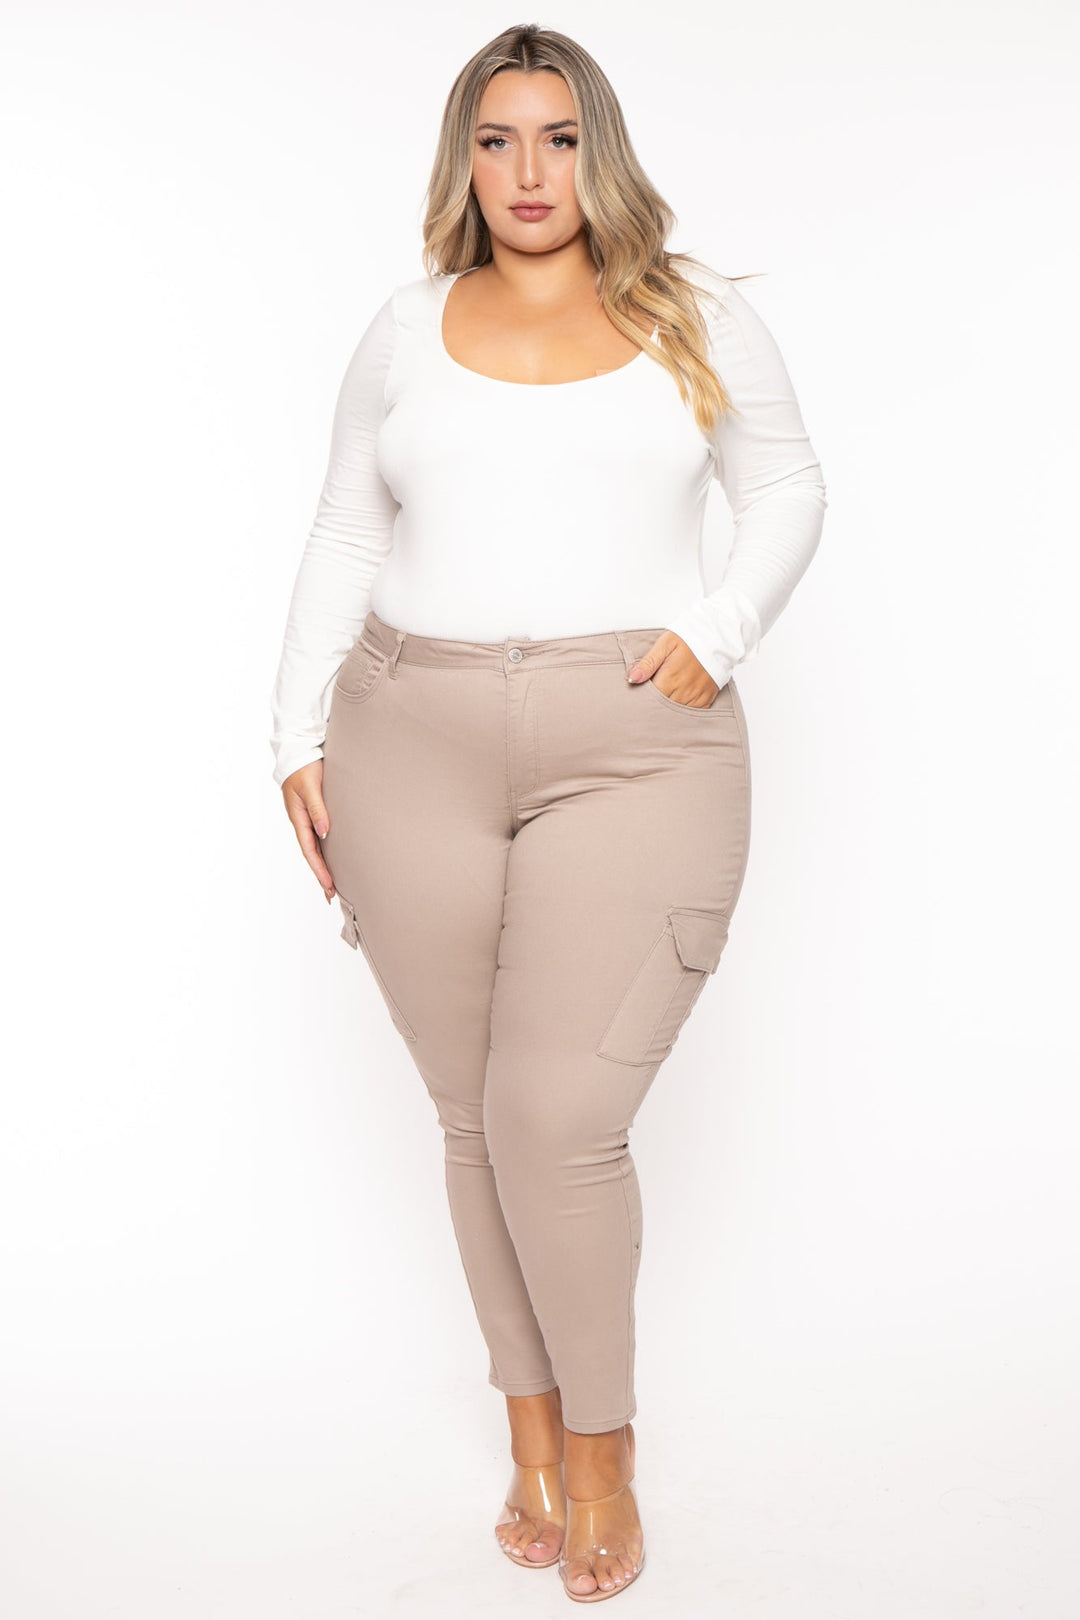 CULTURE CODE Bralettes And Bodysuits Plus Size Aime  Long Sleeve Bodysuit - Ivory